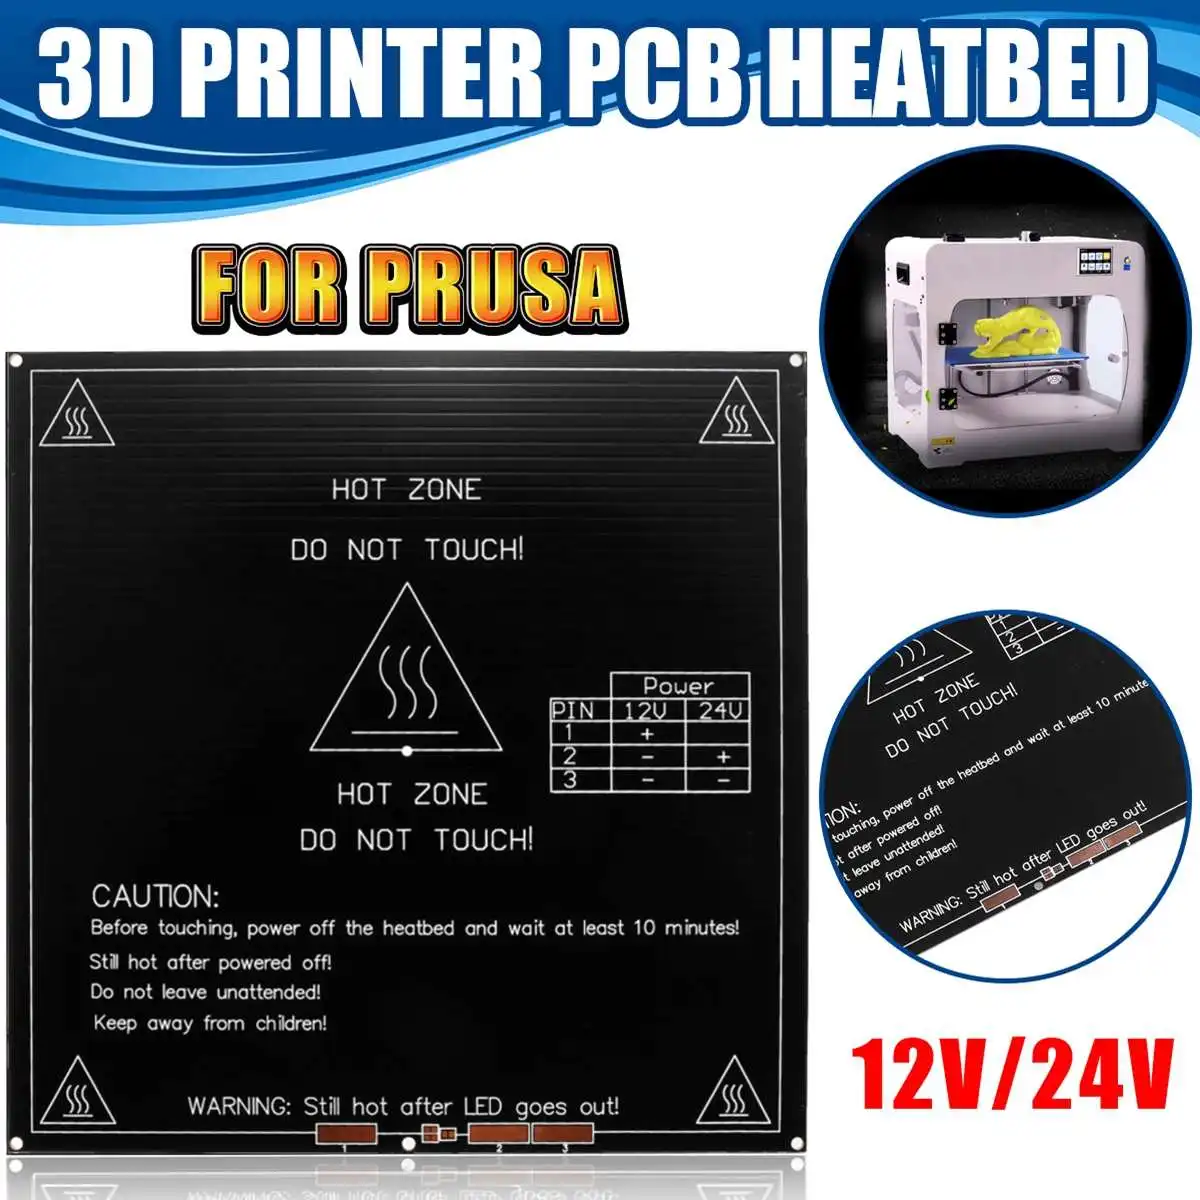 214x214mm 12V/24V Dual Power MK2B PCB Heated Bed Hot Bed For Prusa 3D Printer 